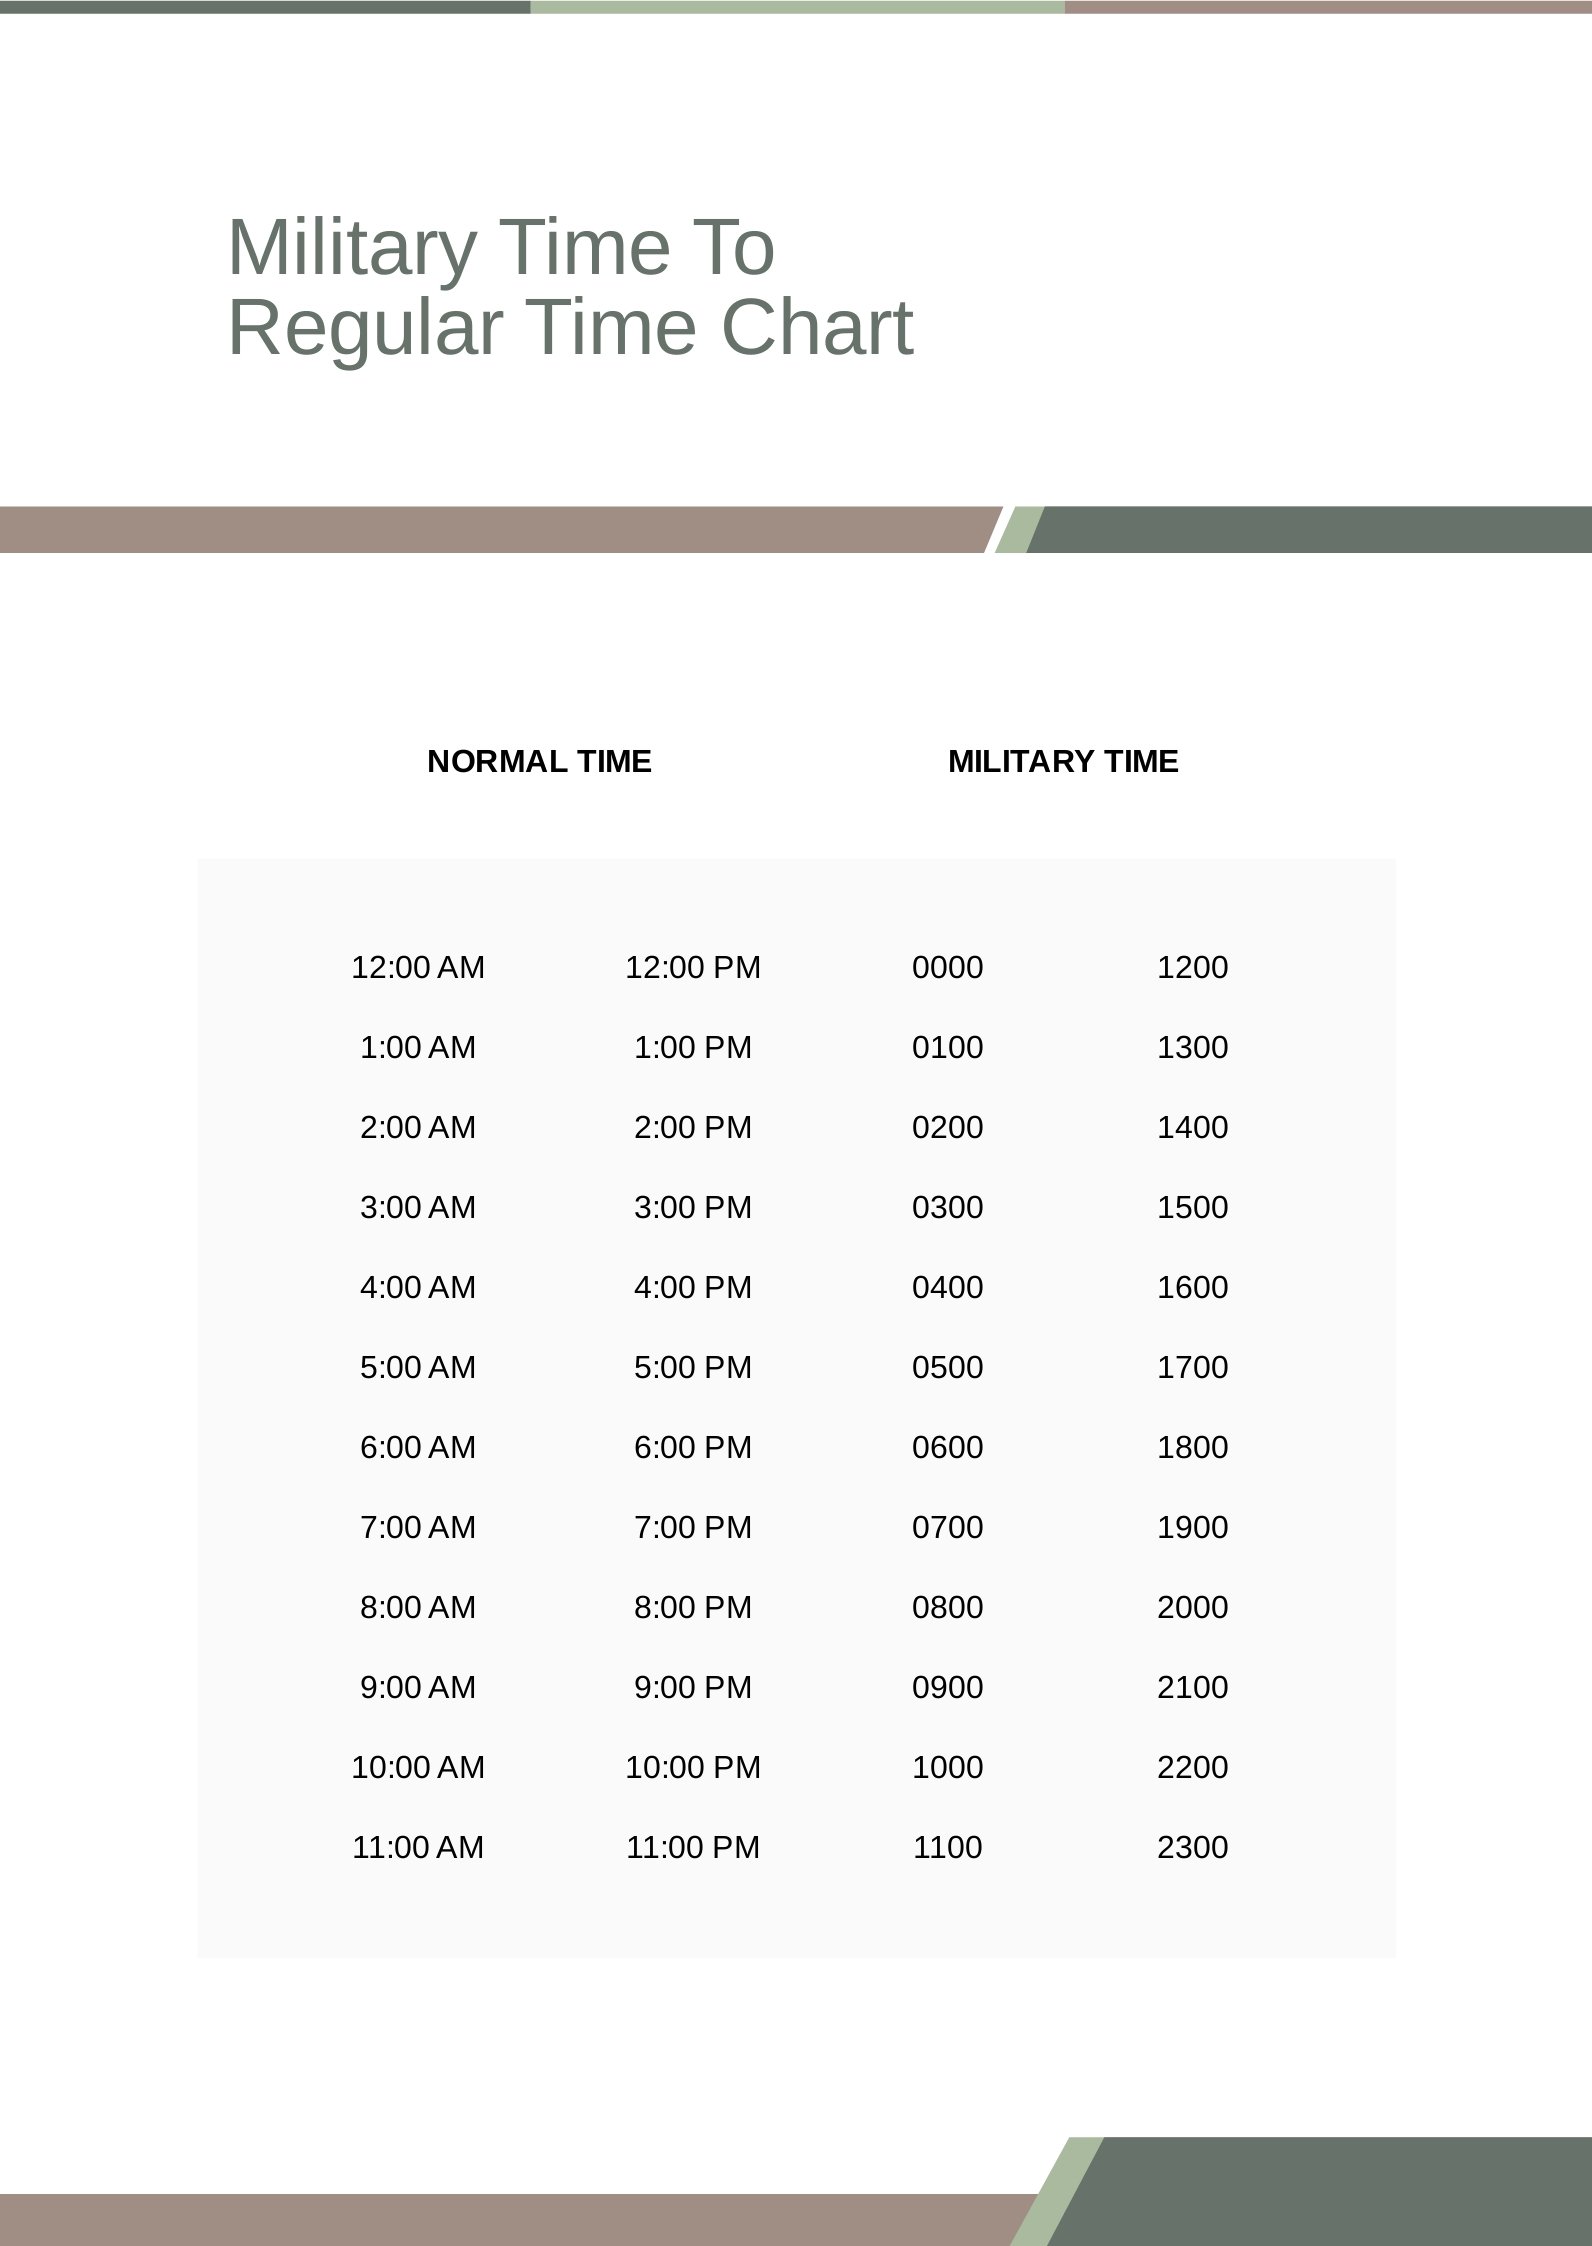 Military Time To Regular Time Chart